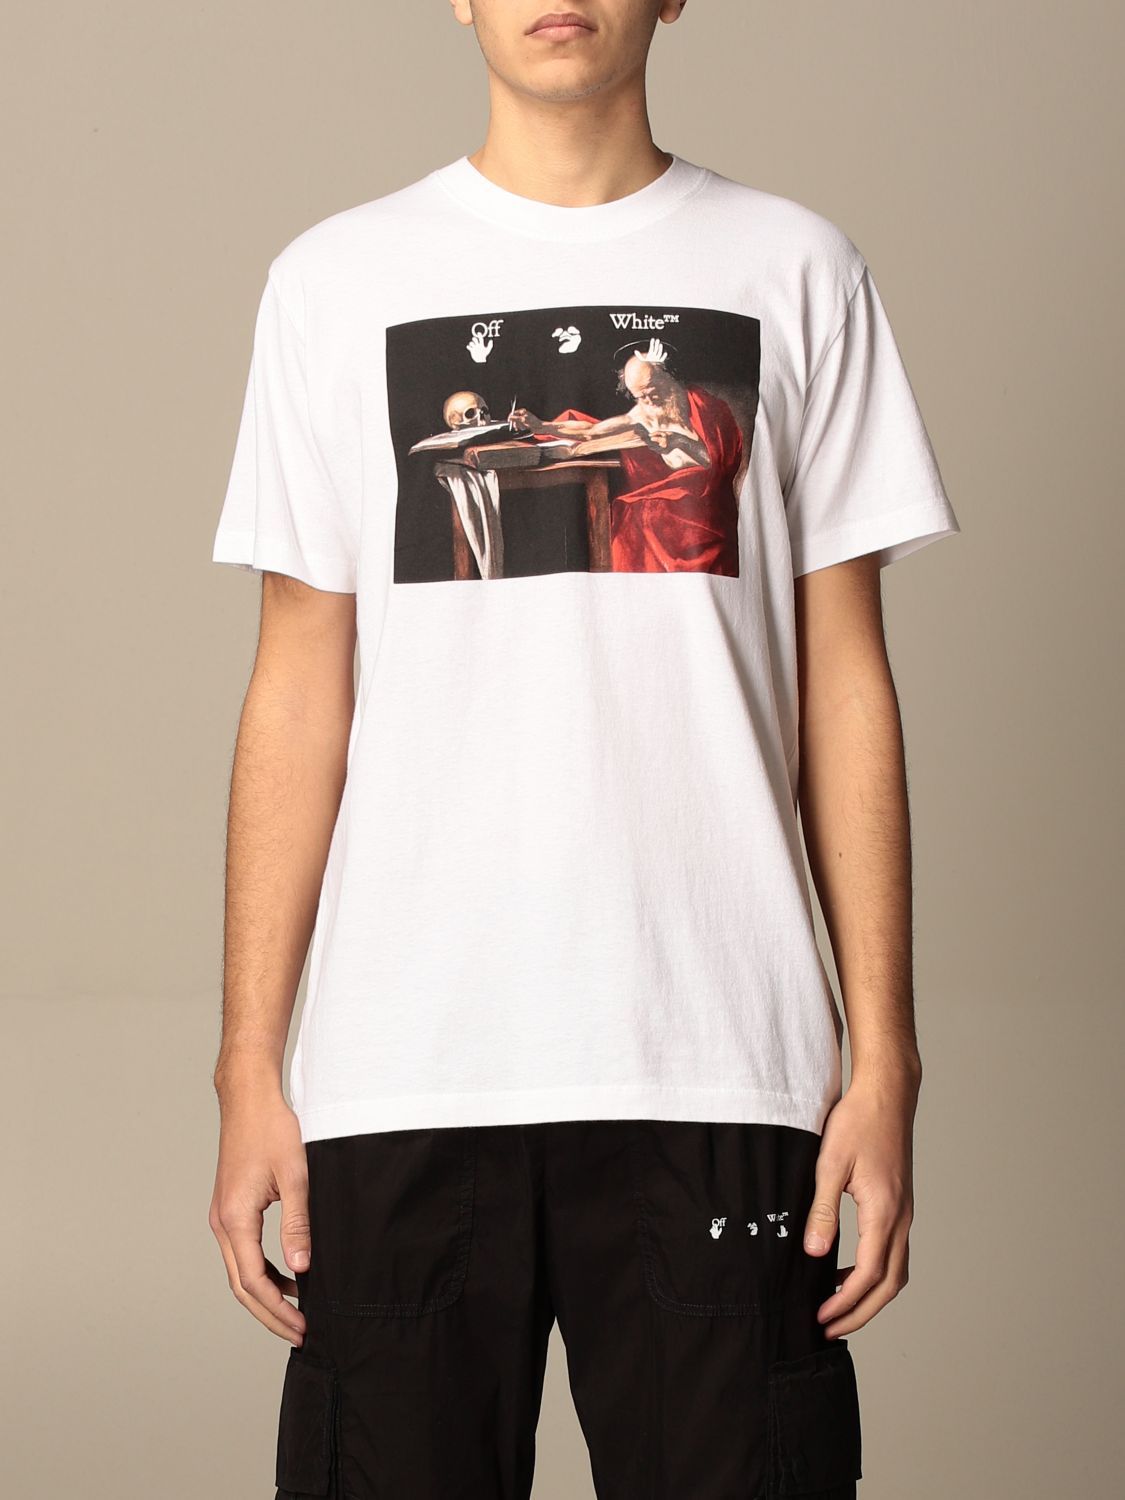 OFF-WHITE: Off White cotton t-shirt with back logo - White | Off-White t- shirt OMAA027R21JER004 online at